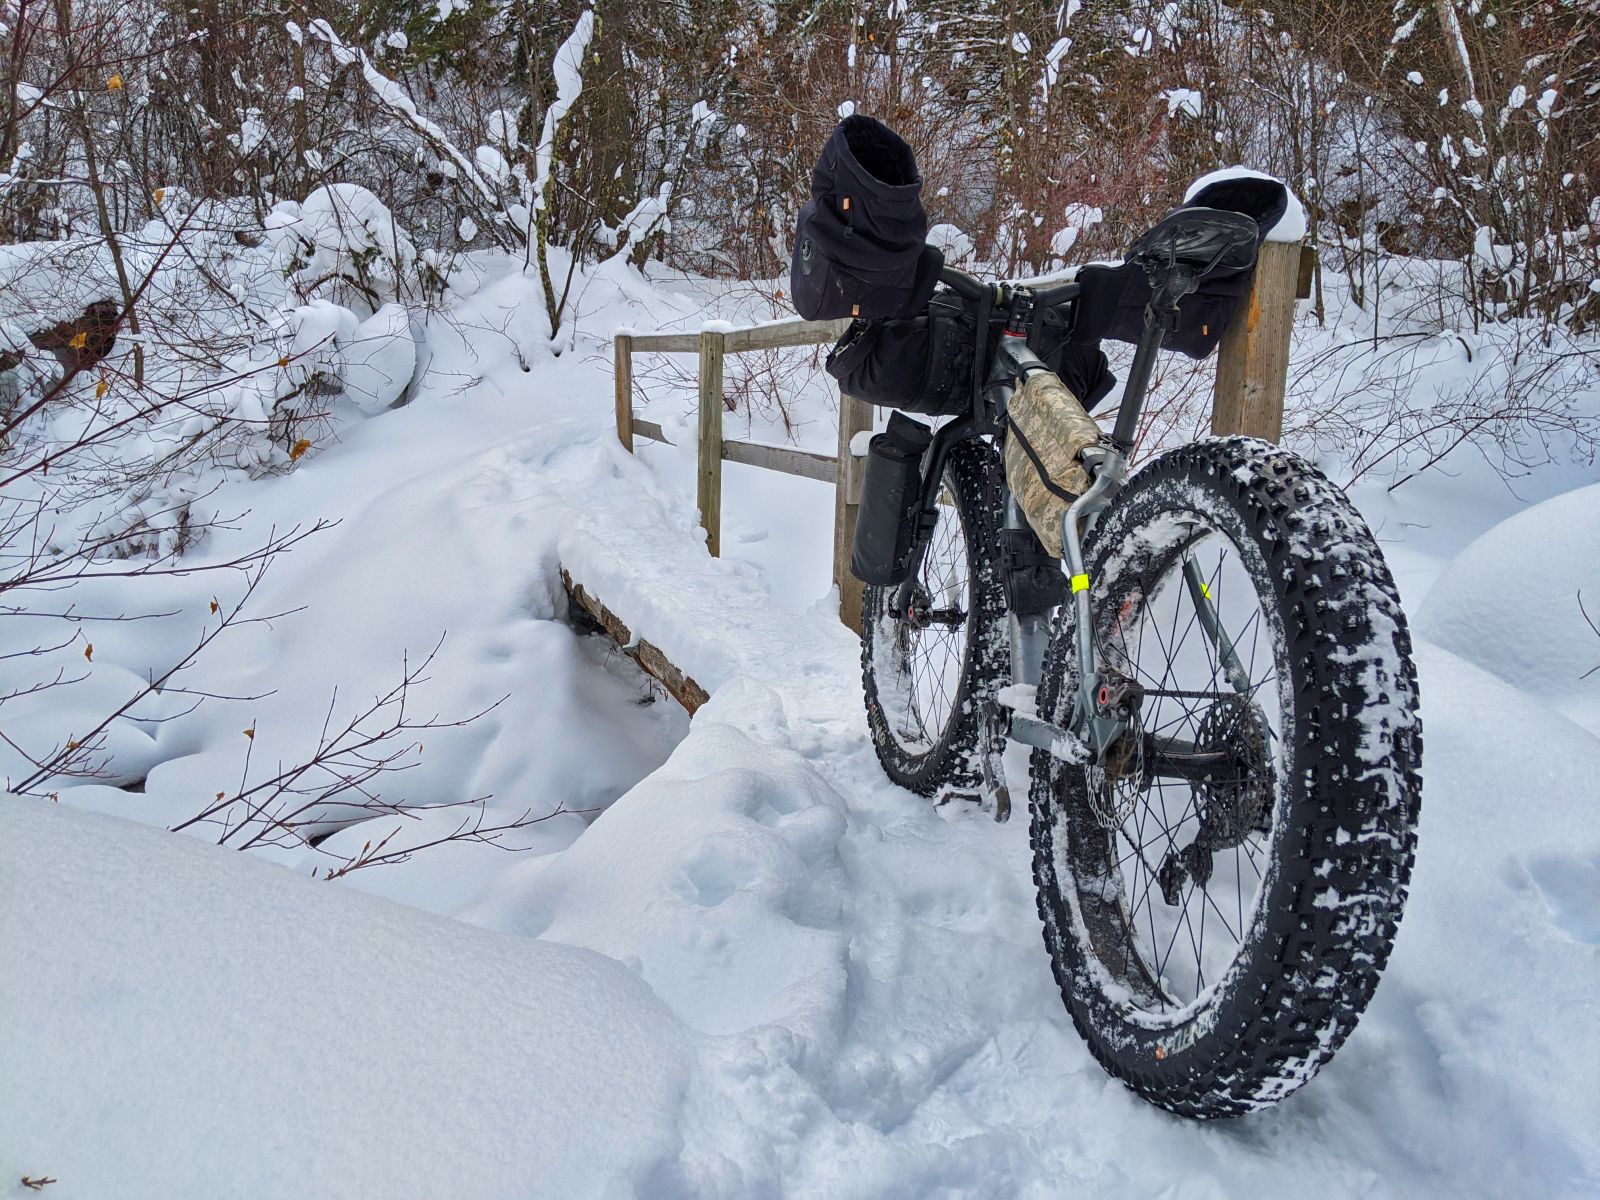 Fatbike with pogies and framebags on a mountain bike trail bridge in the winter.